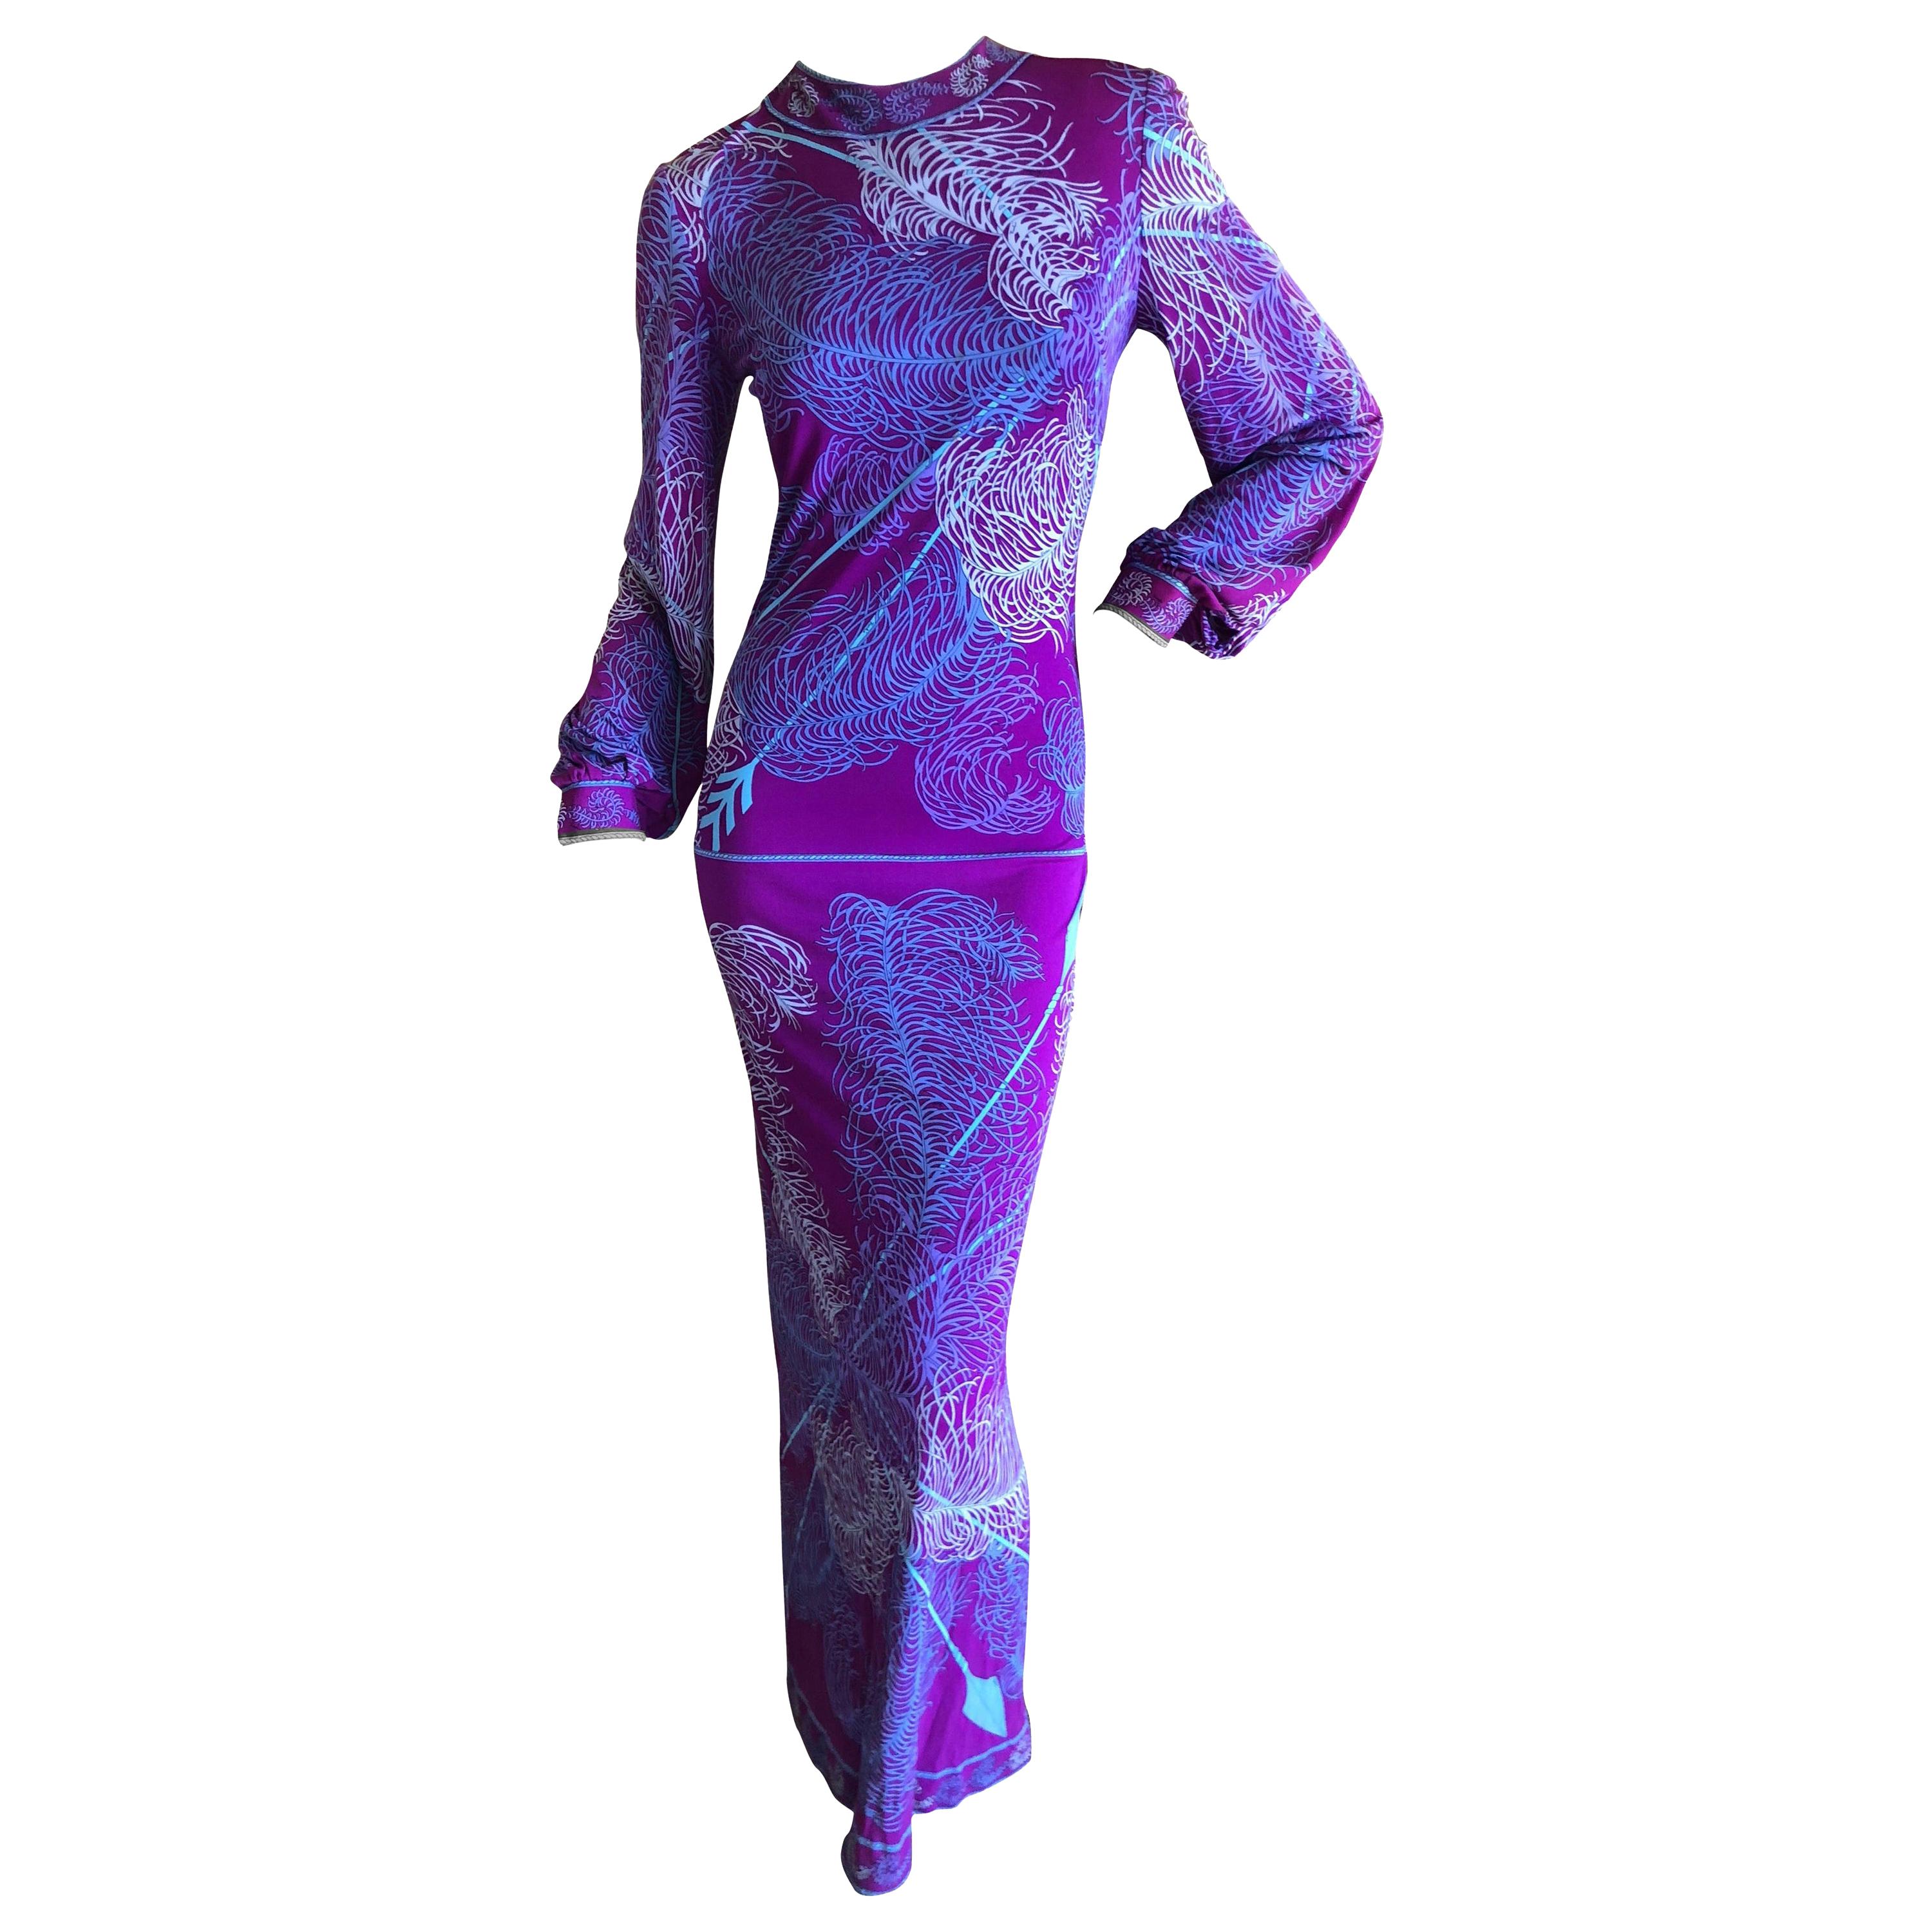 Emilio Pucci Vintage 1960's Silk Jersey Evening Dress for Saks Fifth Avenue For Sale